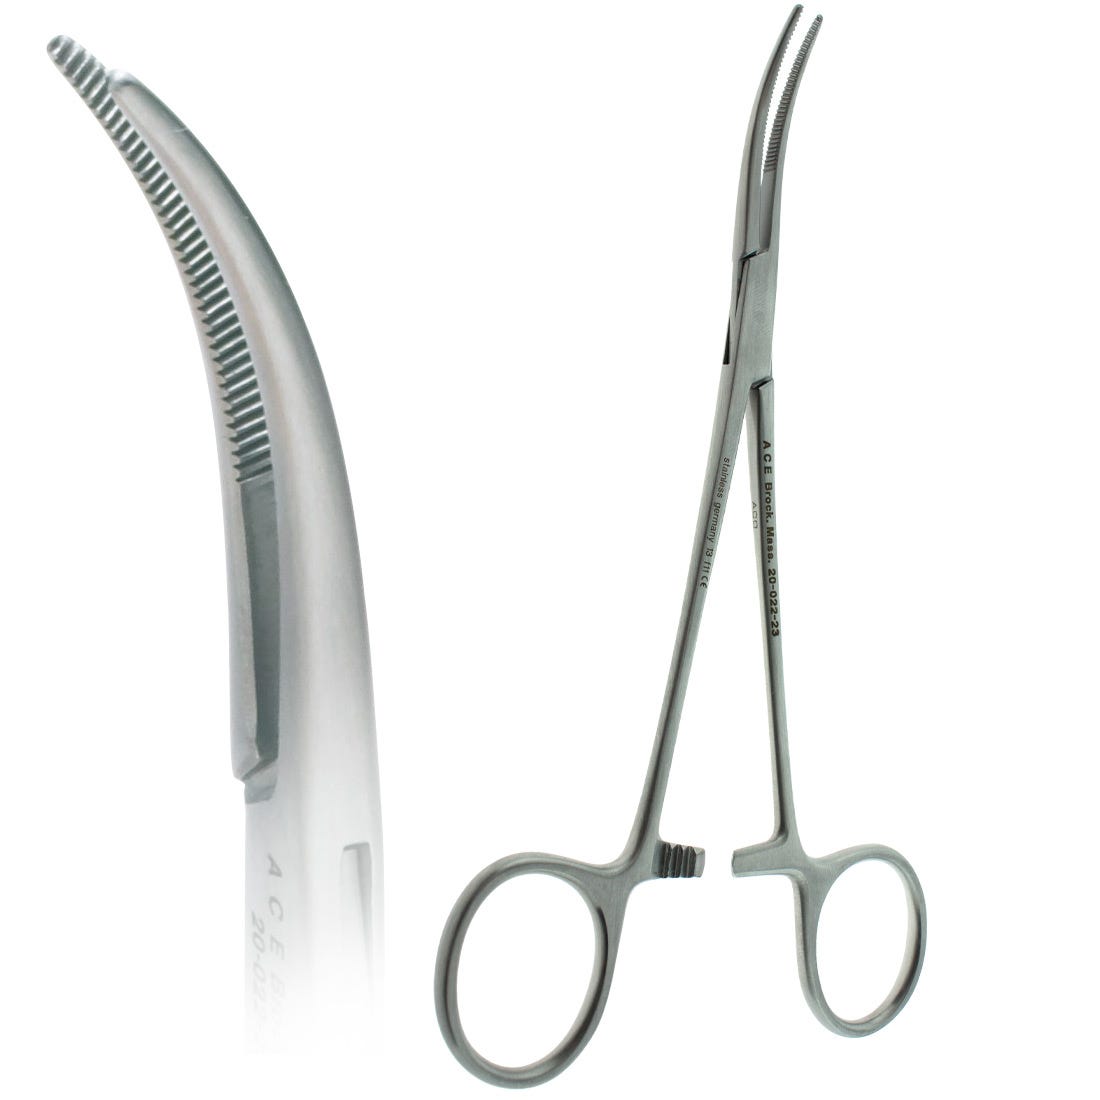 ACE Rankin Kelly Forceps, curved